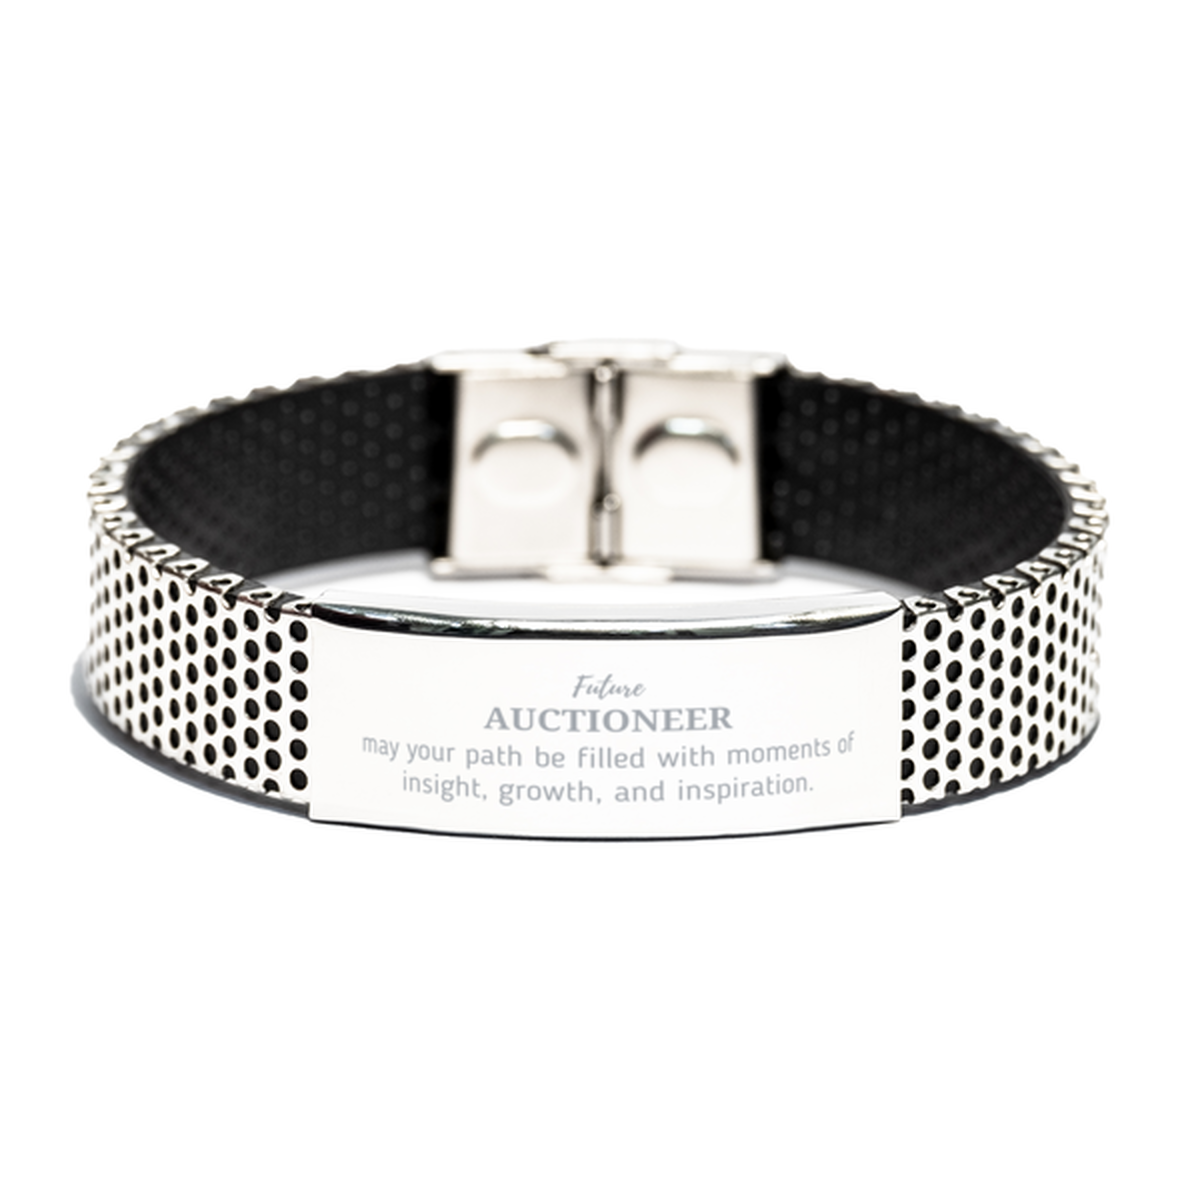 Future Auctioneer Gifts, May your path be filled with moments of insight, Graduation Gifts for New Auctioneer, Christmas Unique Stainless Steel Bracelet For Men, Women, Friends